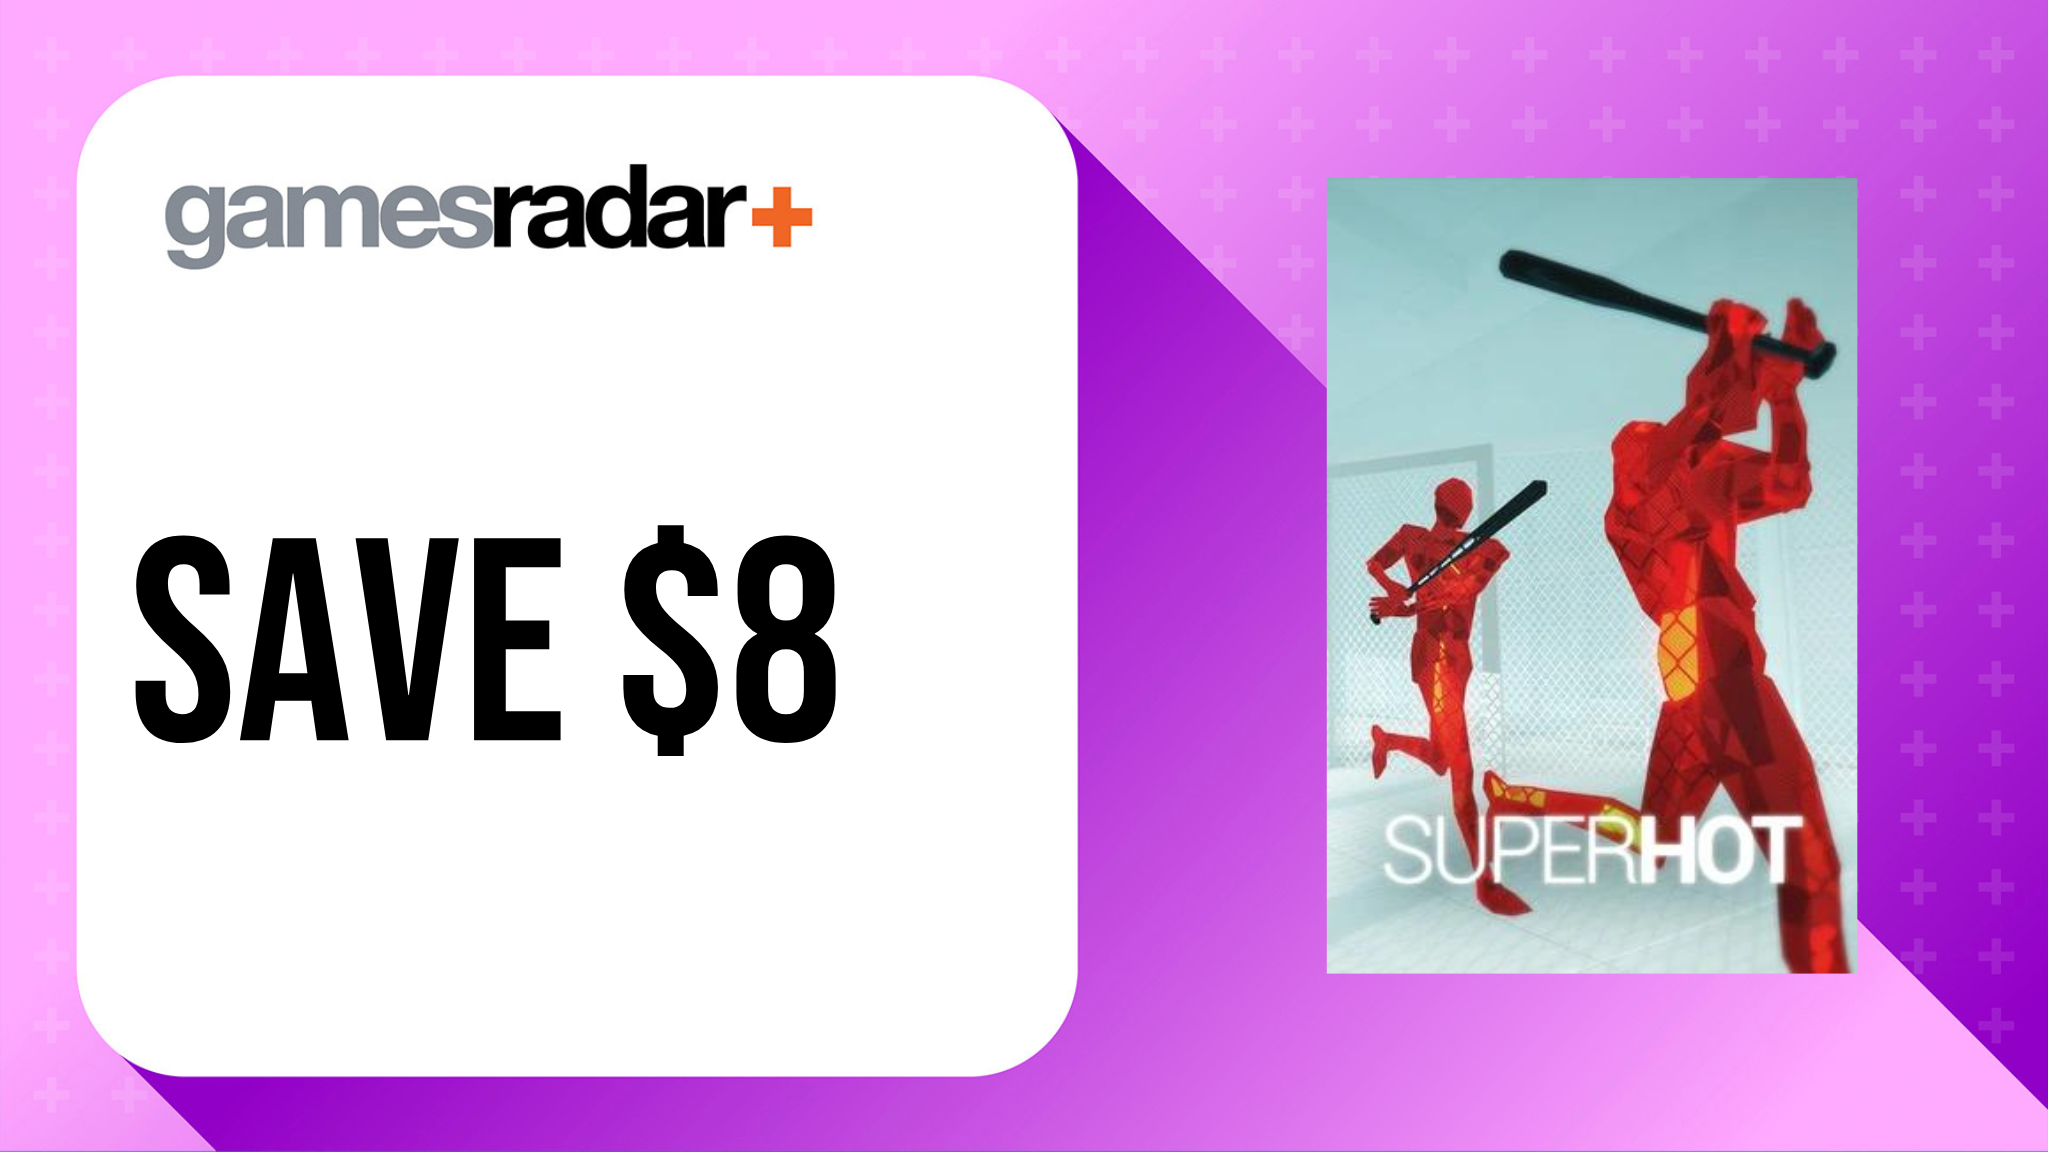 Superhot VR deal image with $8 saving stamp and purple background